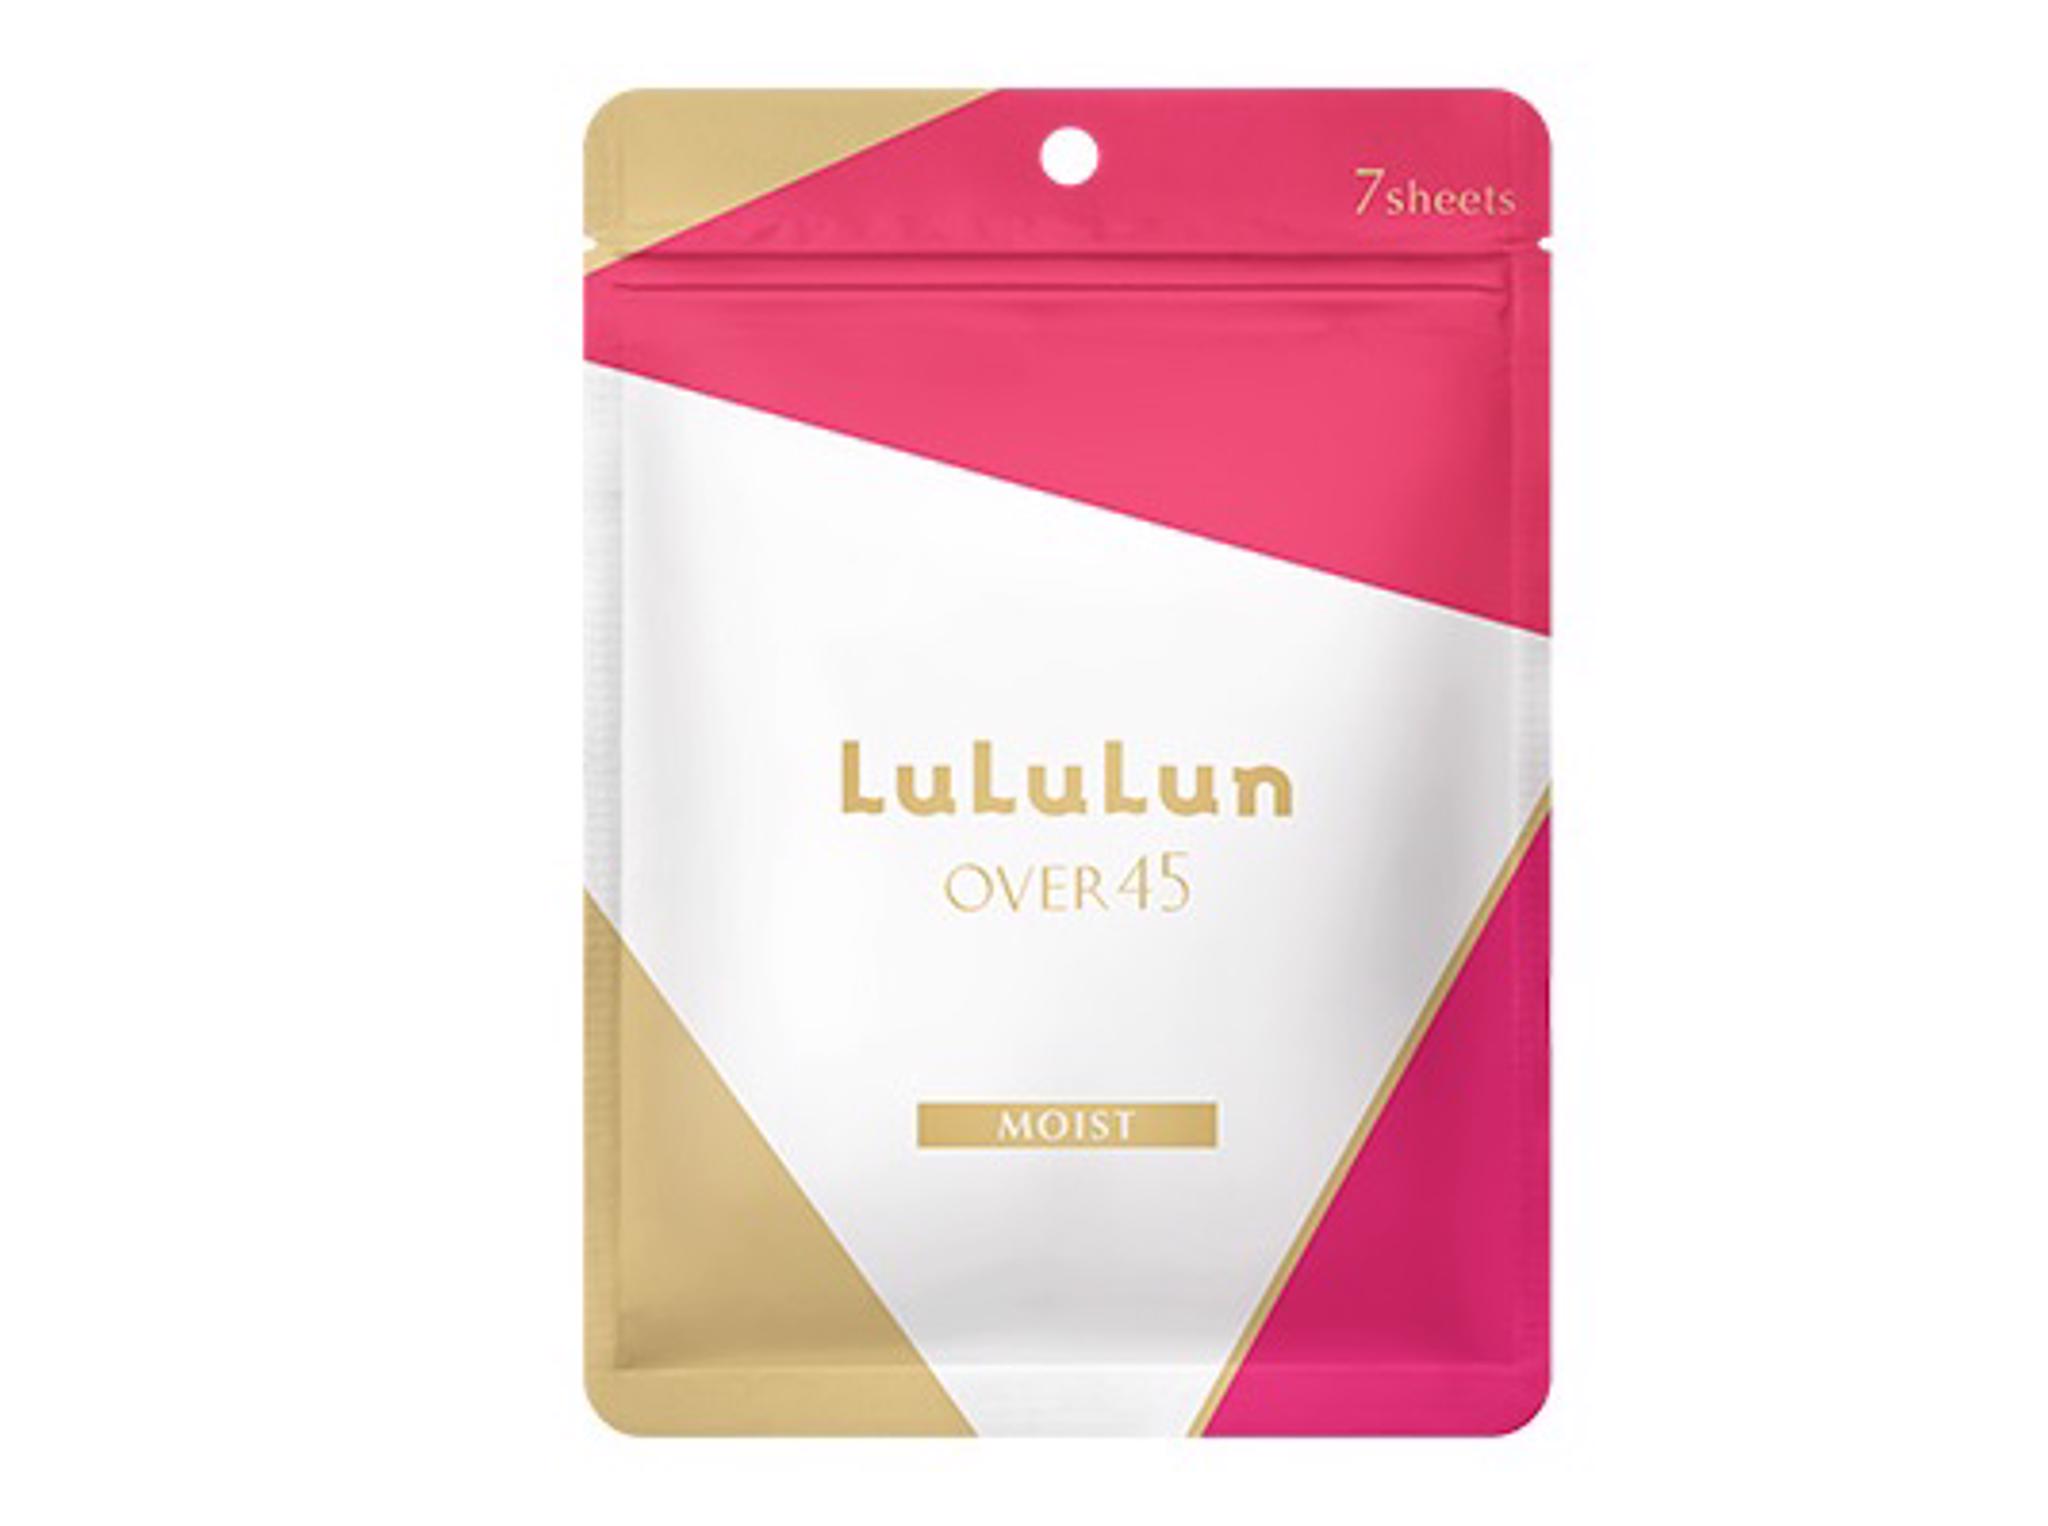 LuLuLun - Face Mask [Over45 Series] - Moist(Camellia Pink) 7 Sheets 3648